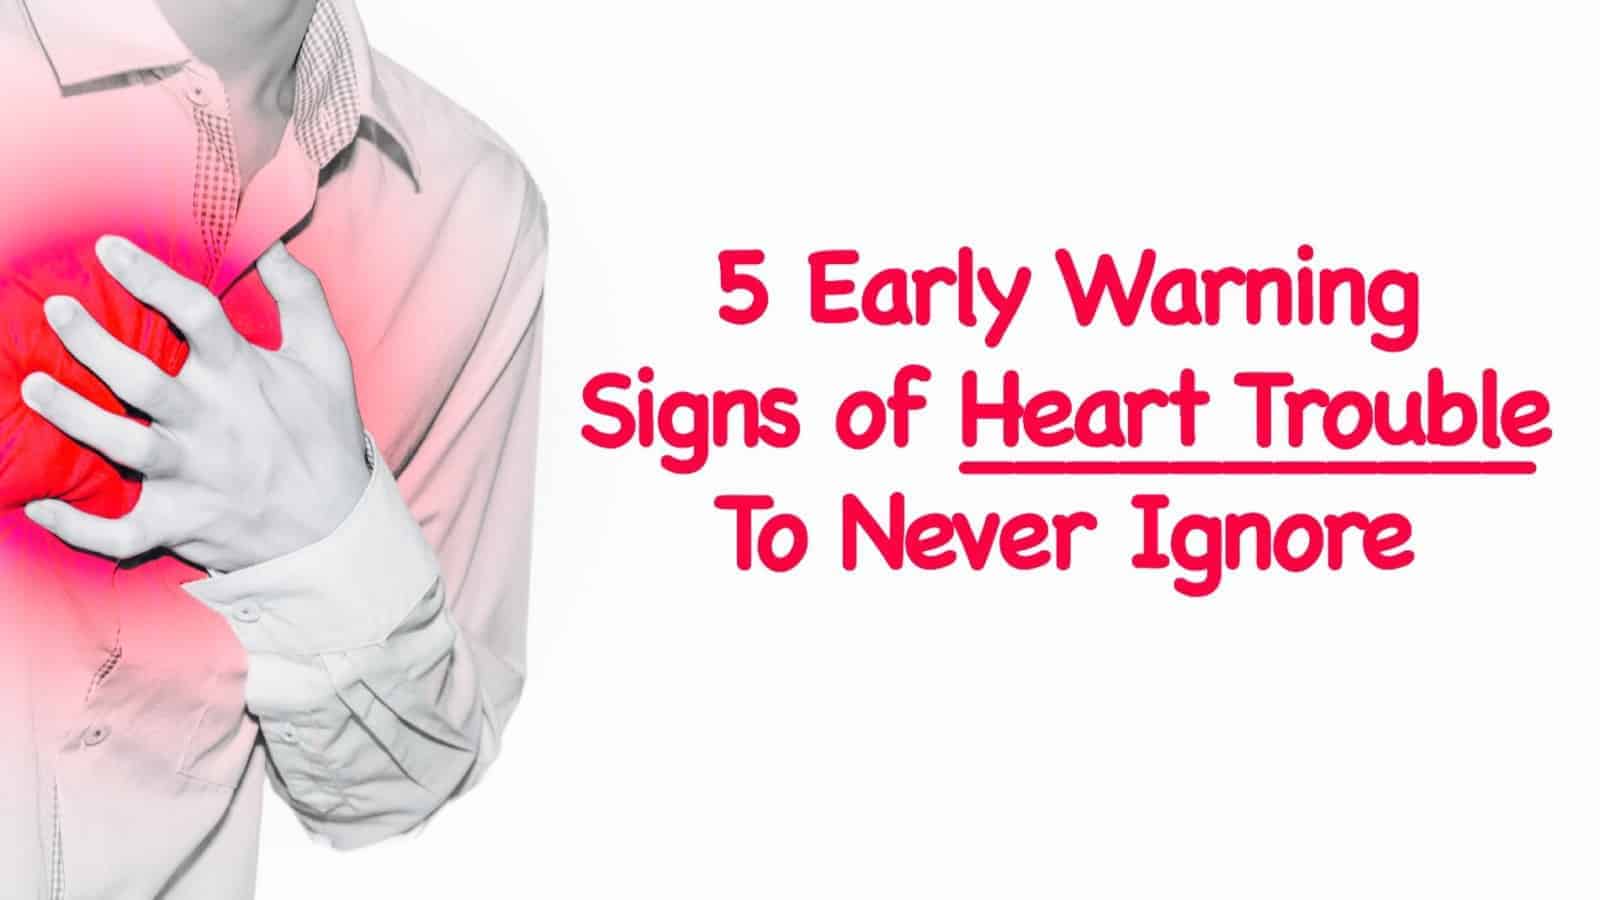 5 Early Warning Signs of Heart Trouble to Never Ignore